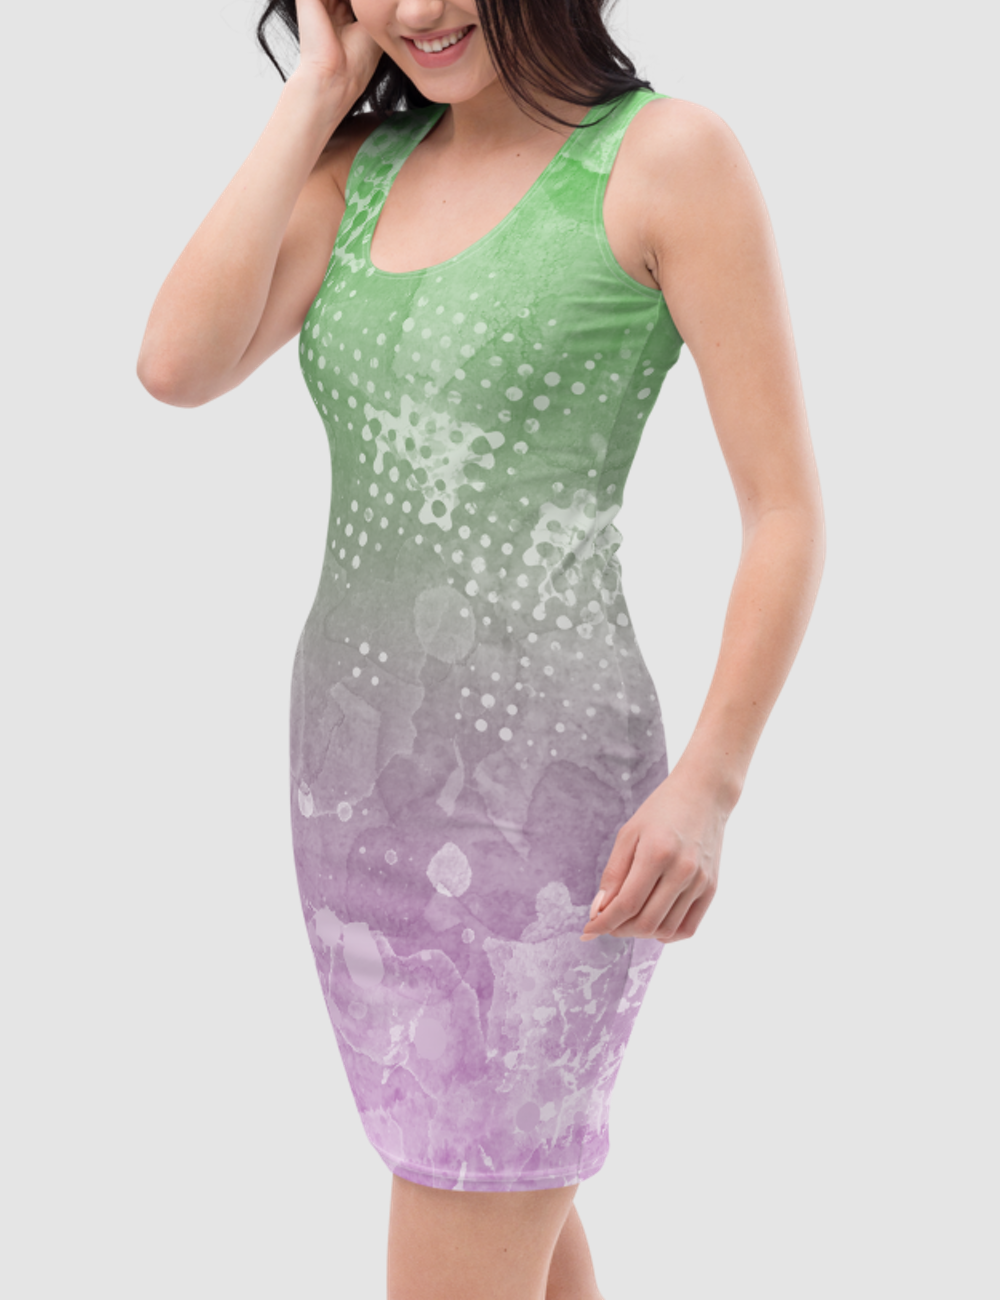 Mermaid Ombre | Women's Sleeveless Fitted Sublimated Dress OniTakai